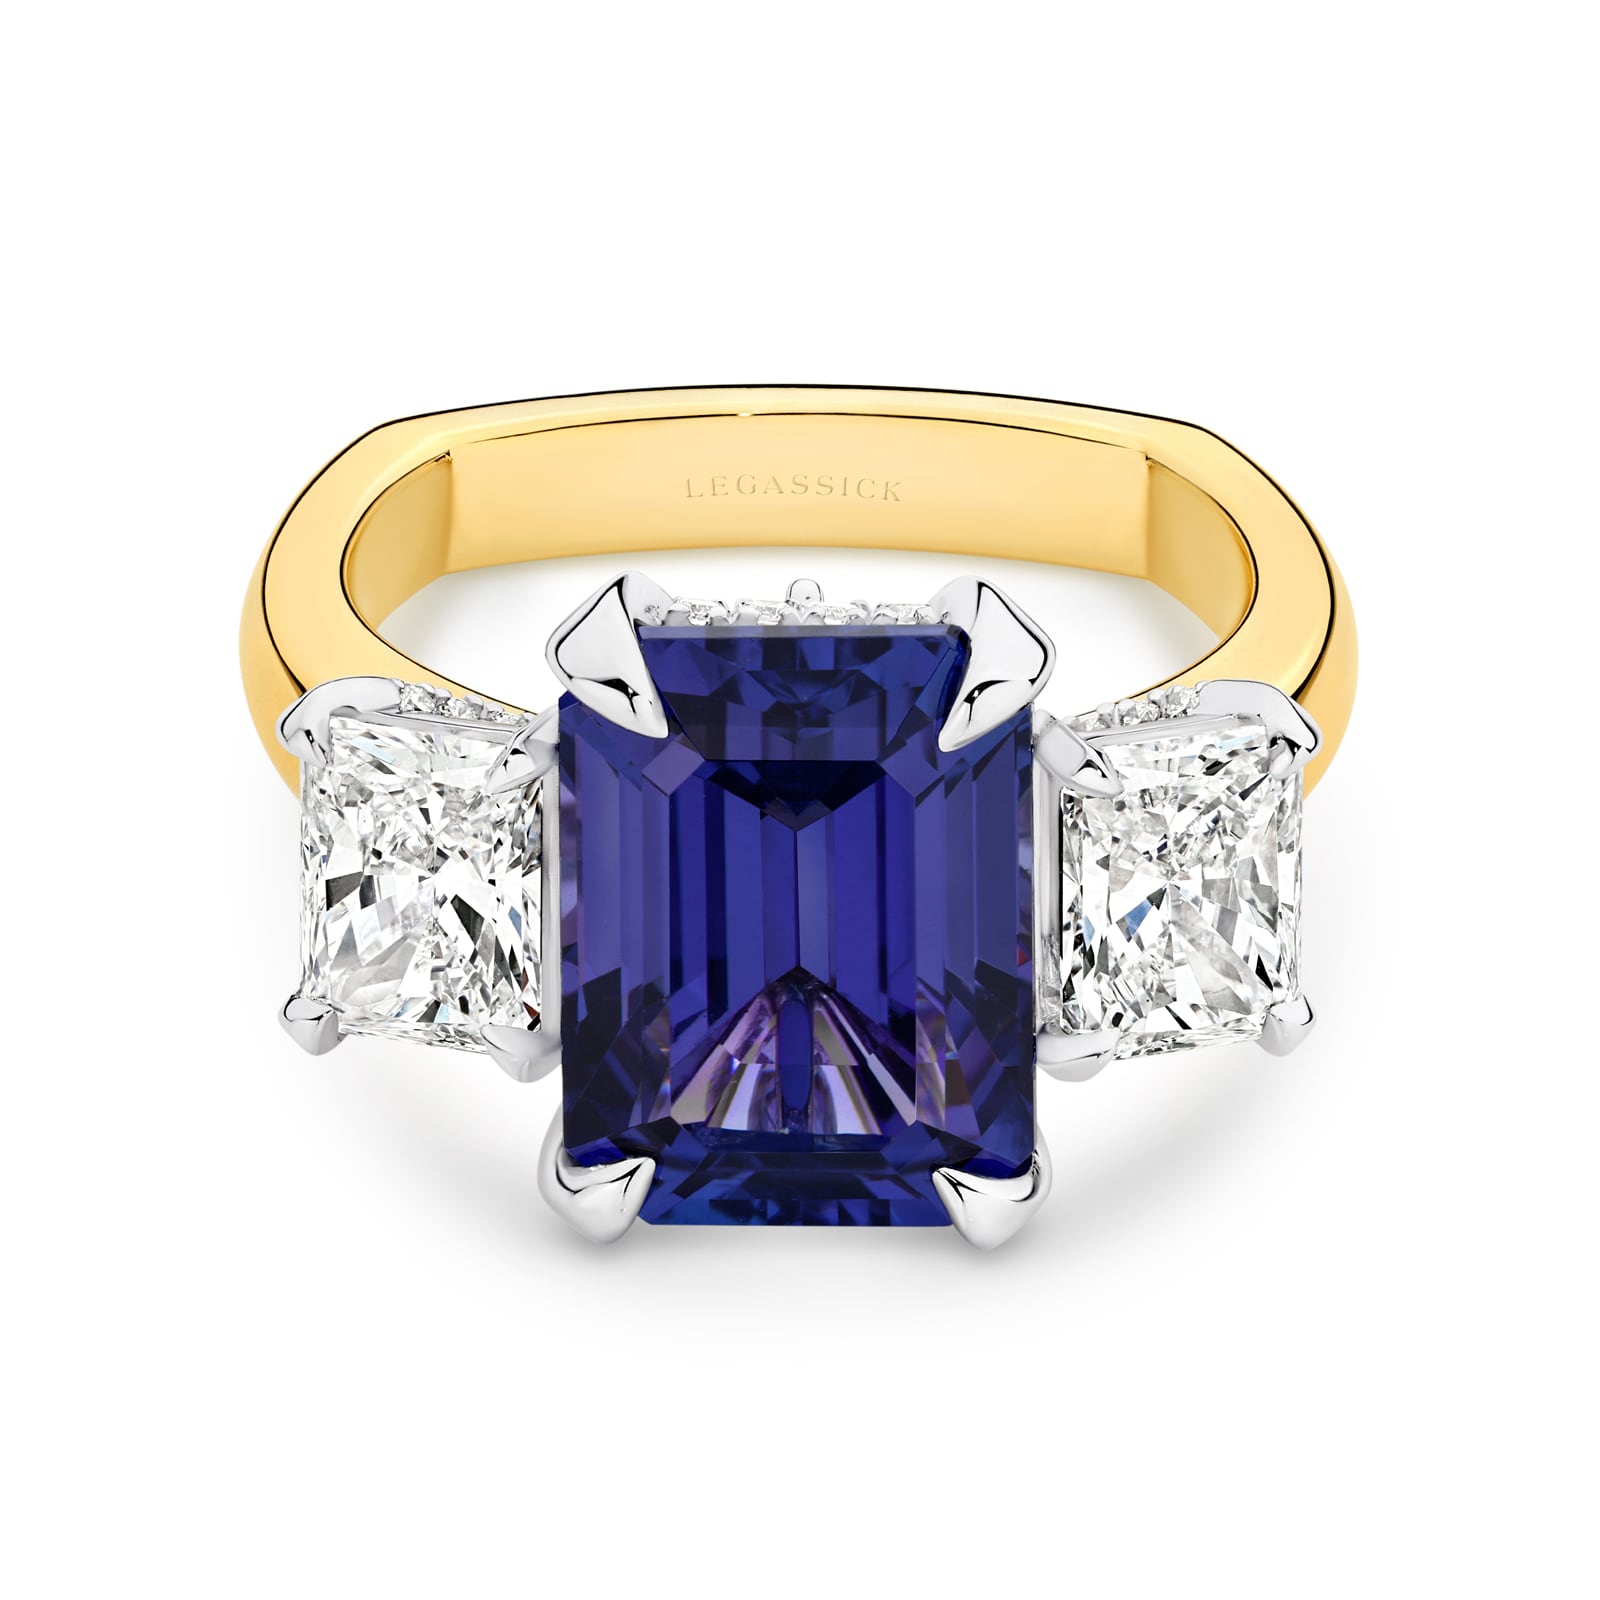 Layla is a 7.43ct emerald cut natural tanzanite and diamond ring. She was designed and handcrafted by LeGassick's Master Jewellers, Gold Coast, Australia.